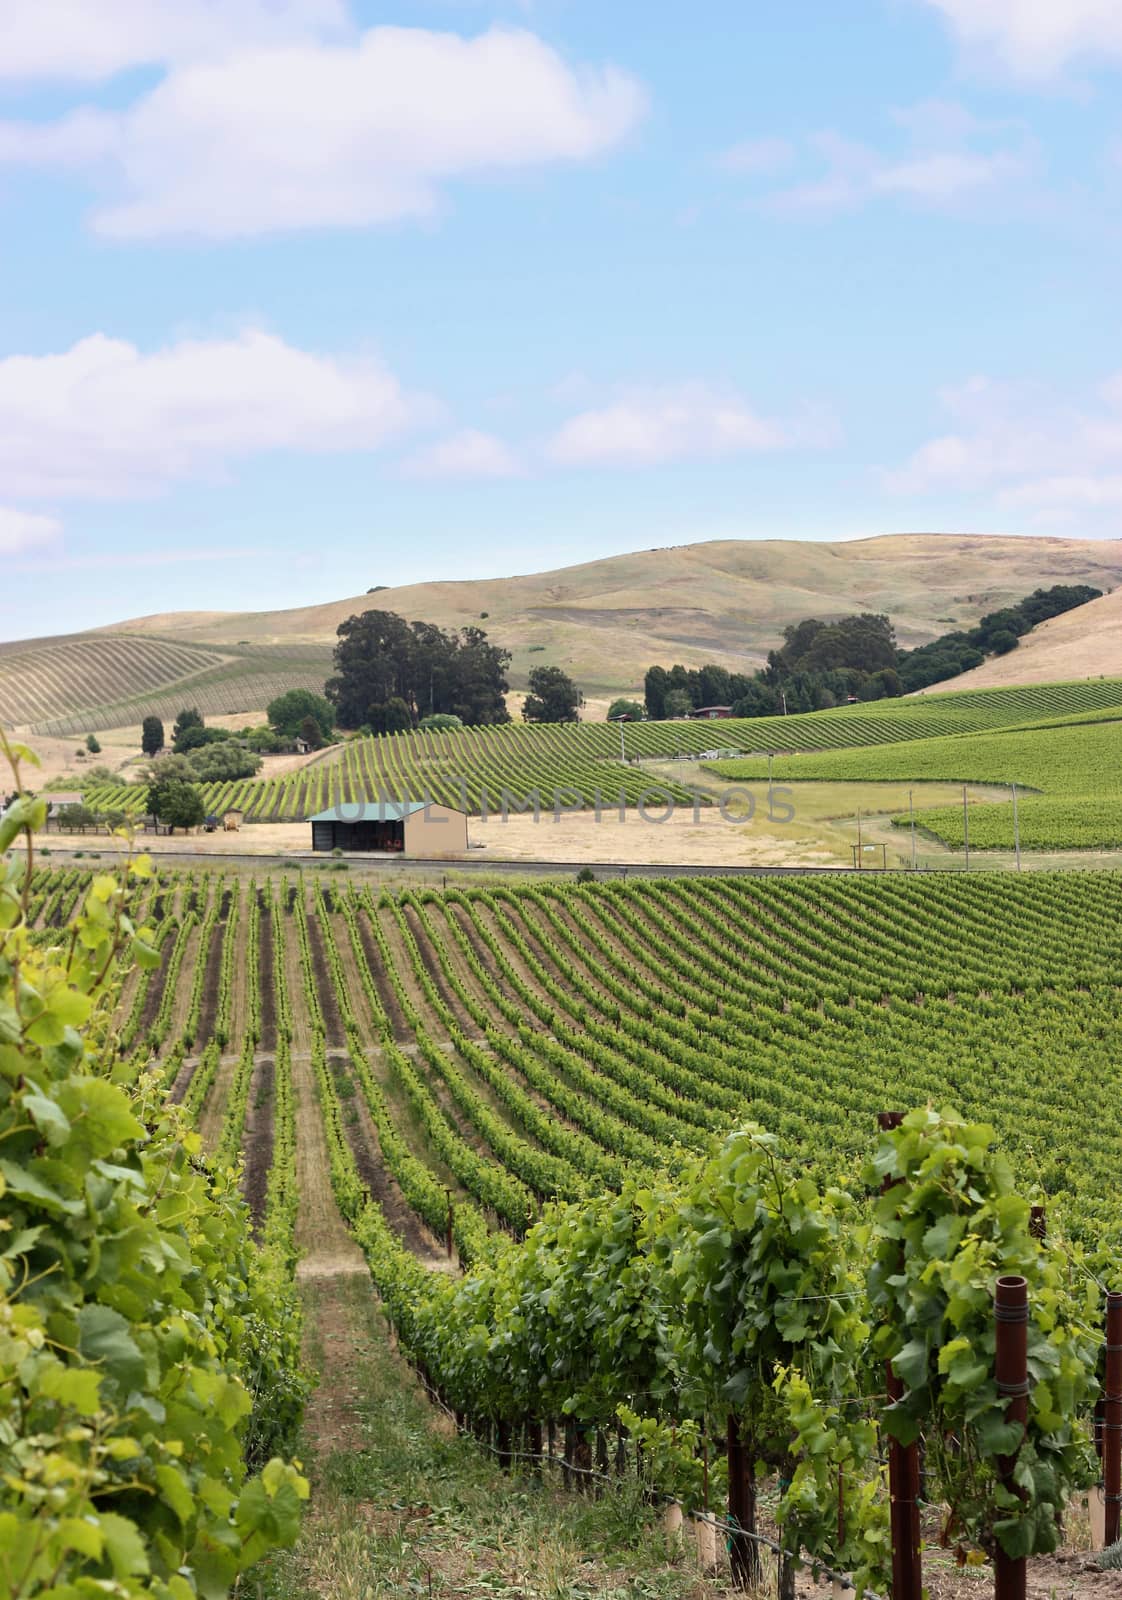 Vineyard hill in napa valley by ziss